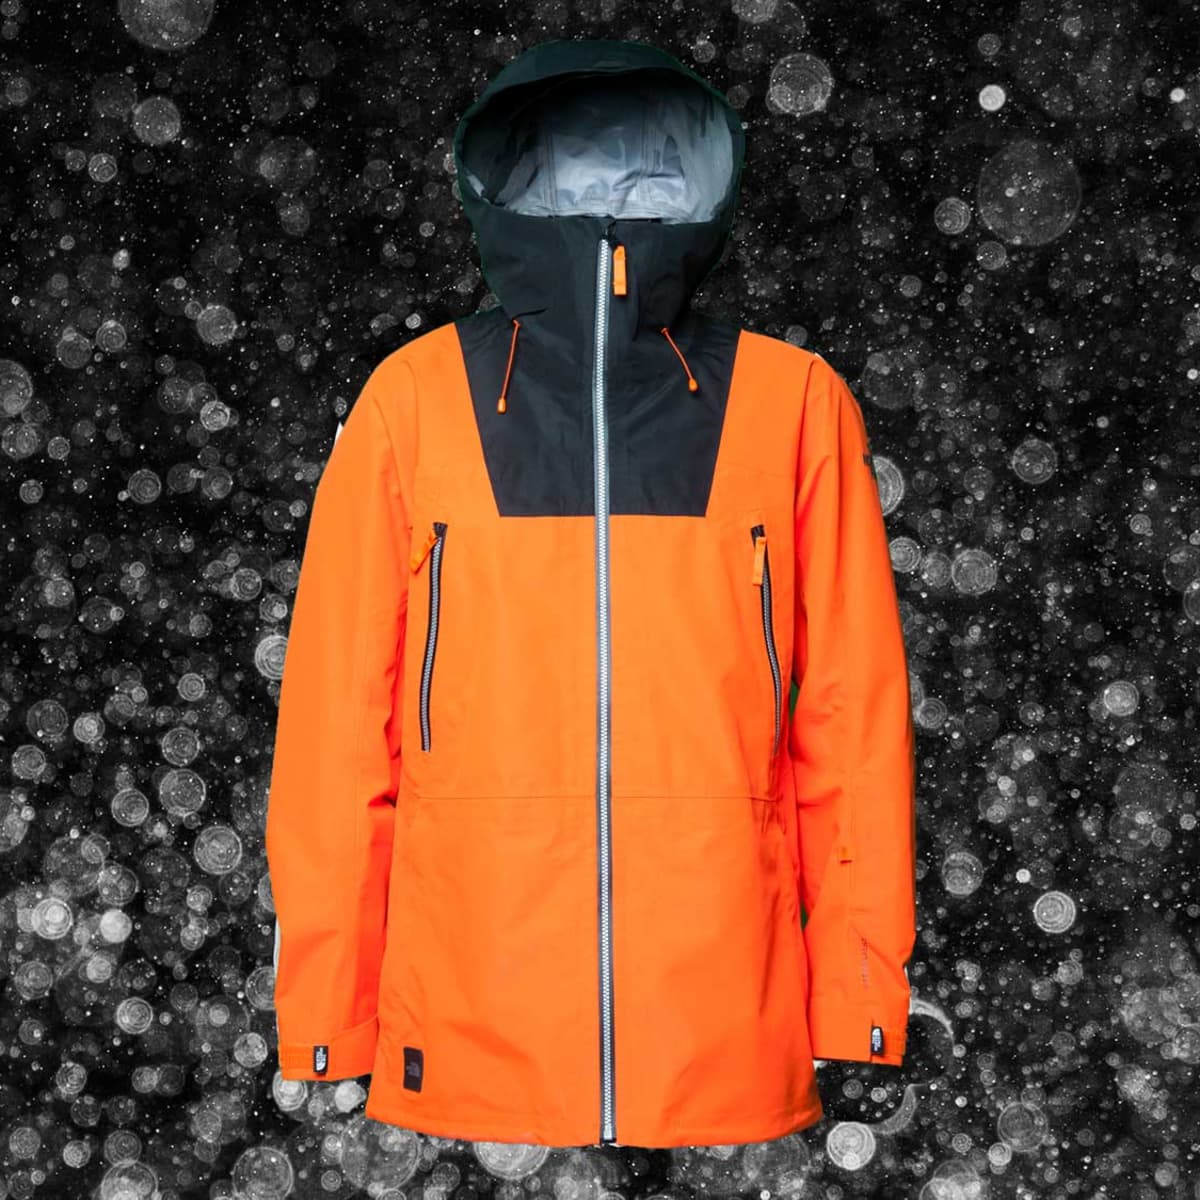 Name Droppin'—The North Face Ceptor Jacket with Spencer Schubert